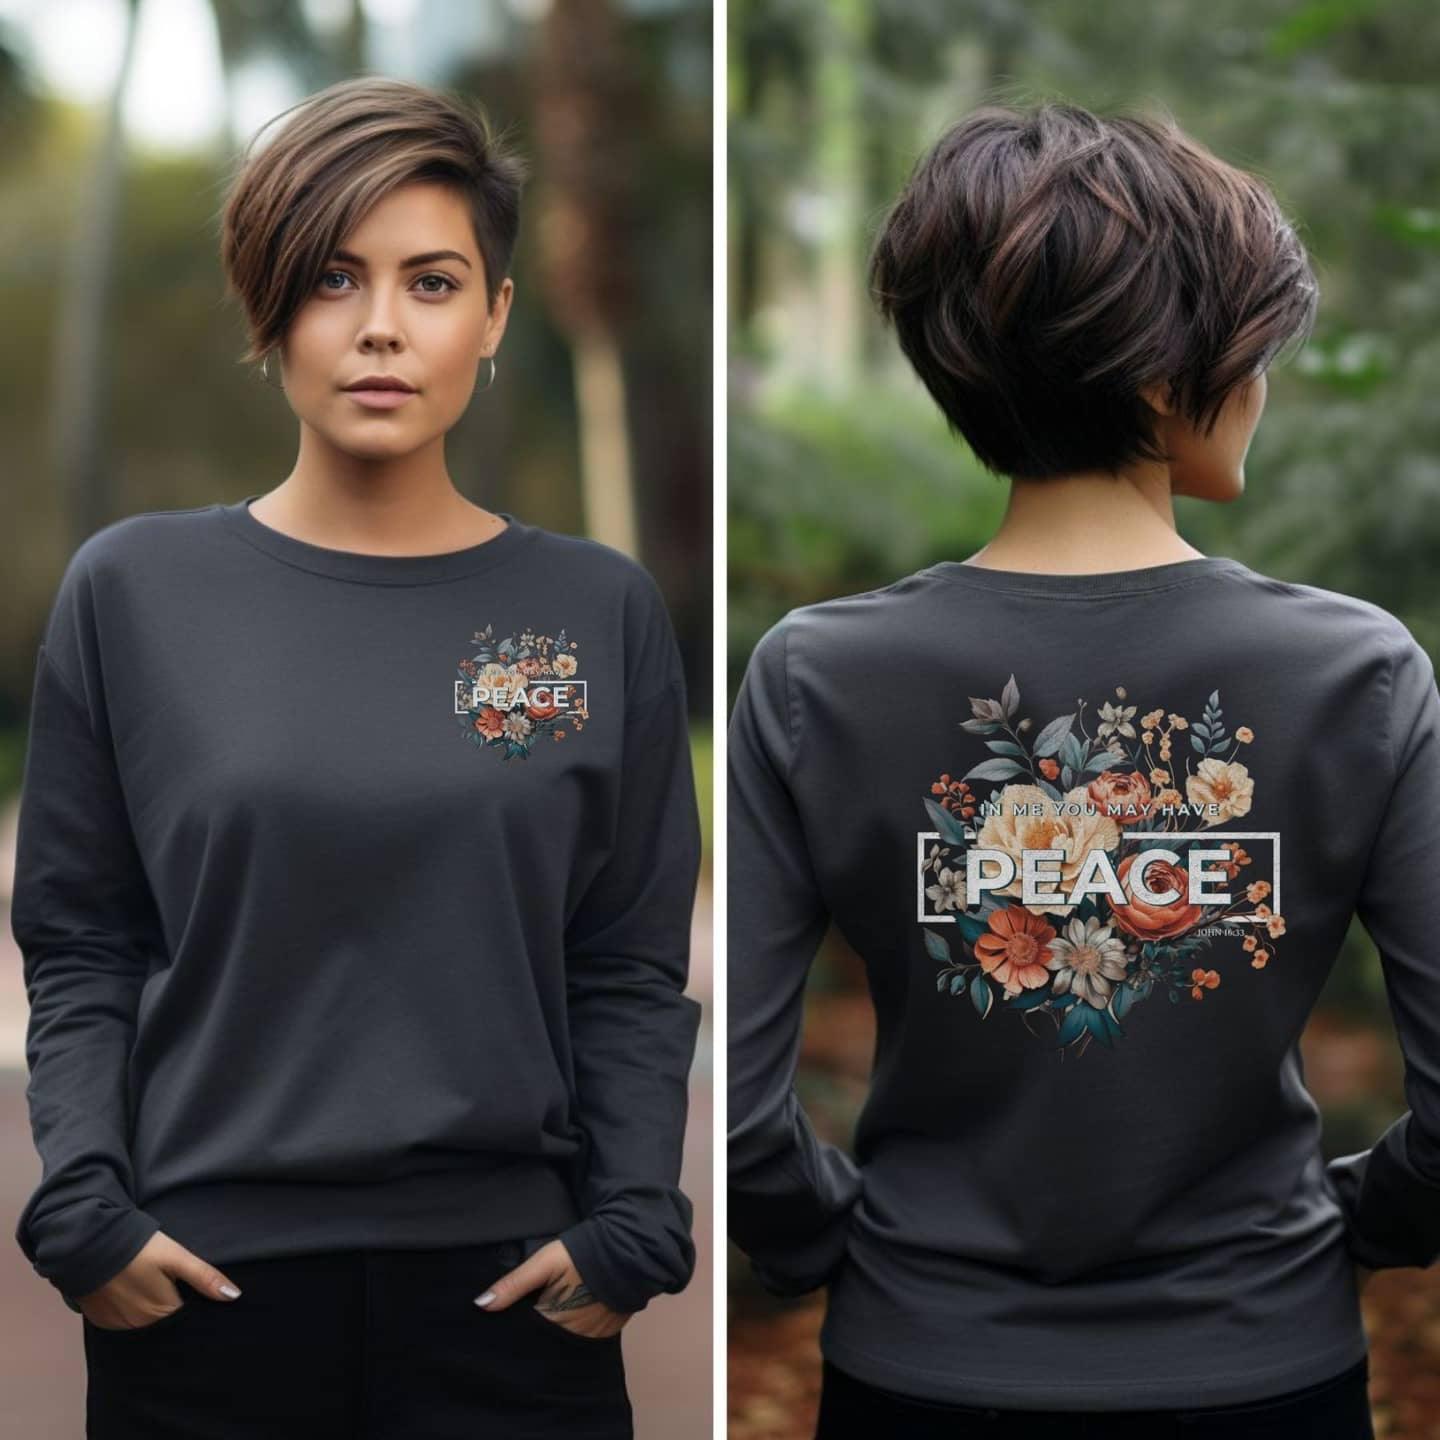 In Me You May Have Peace Women’s Long Sleeve Tee - JT Footprint Apparel